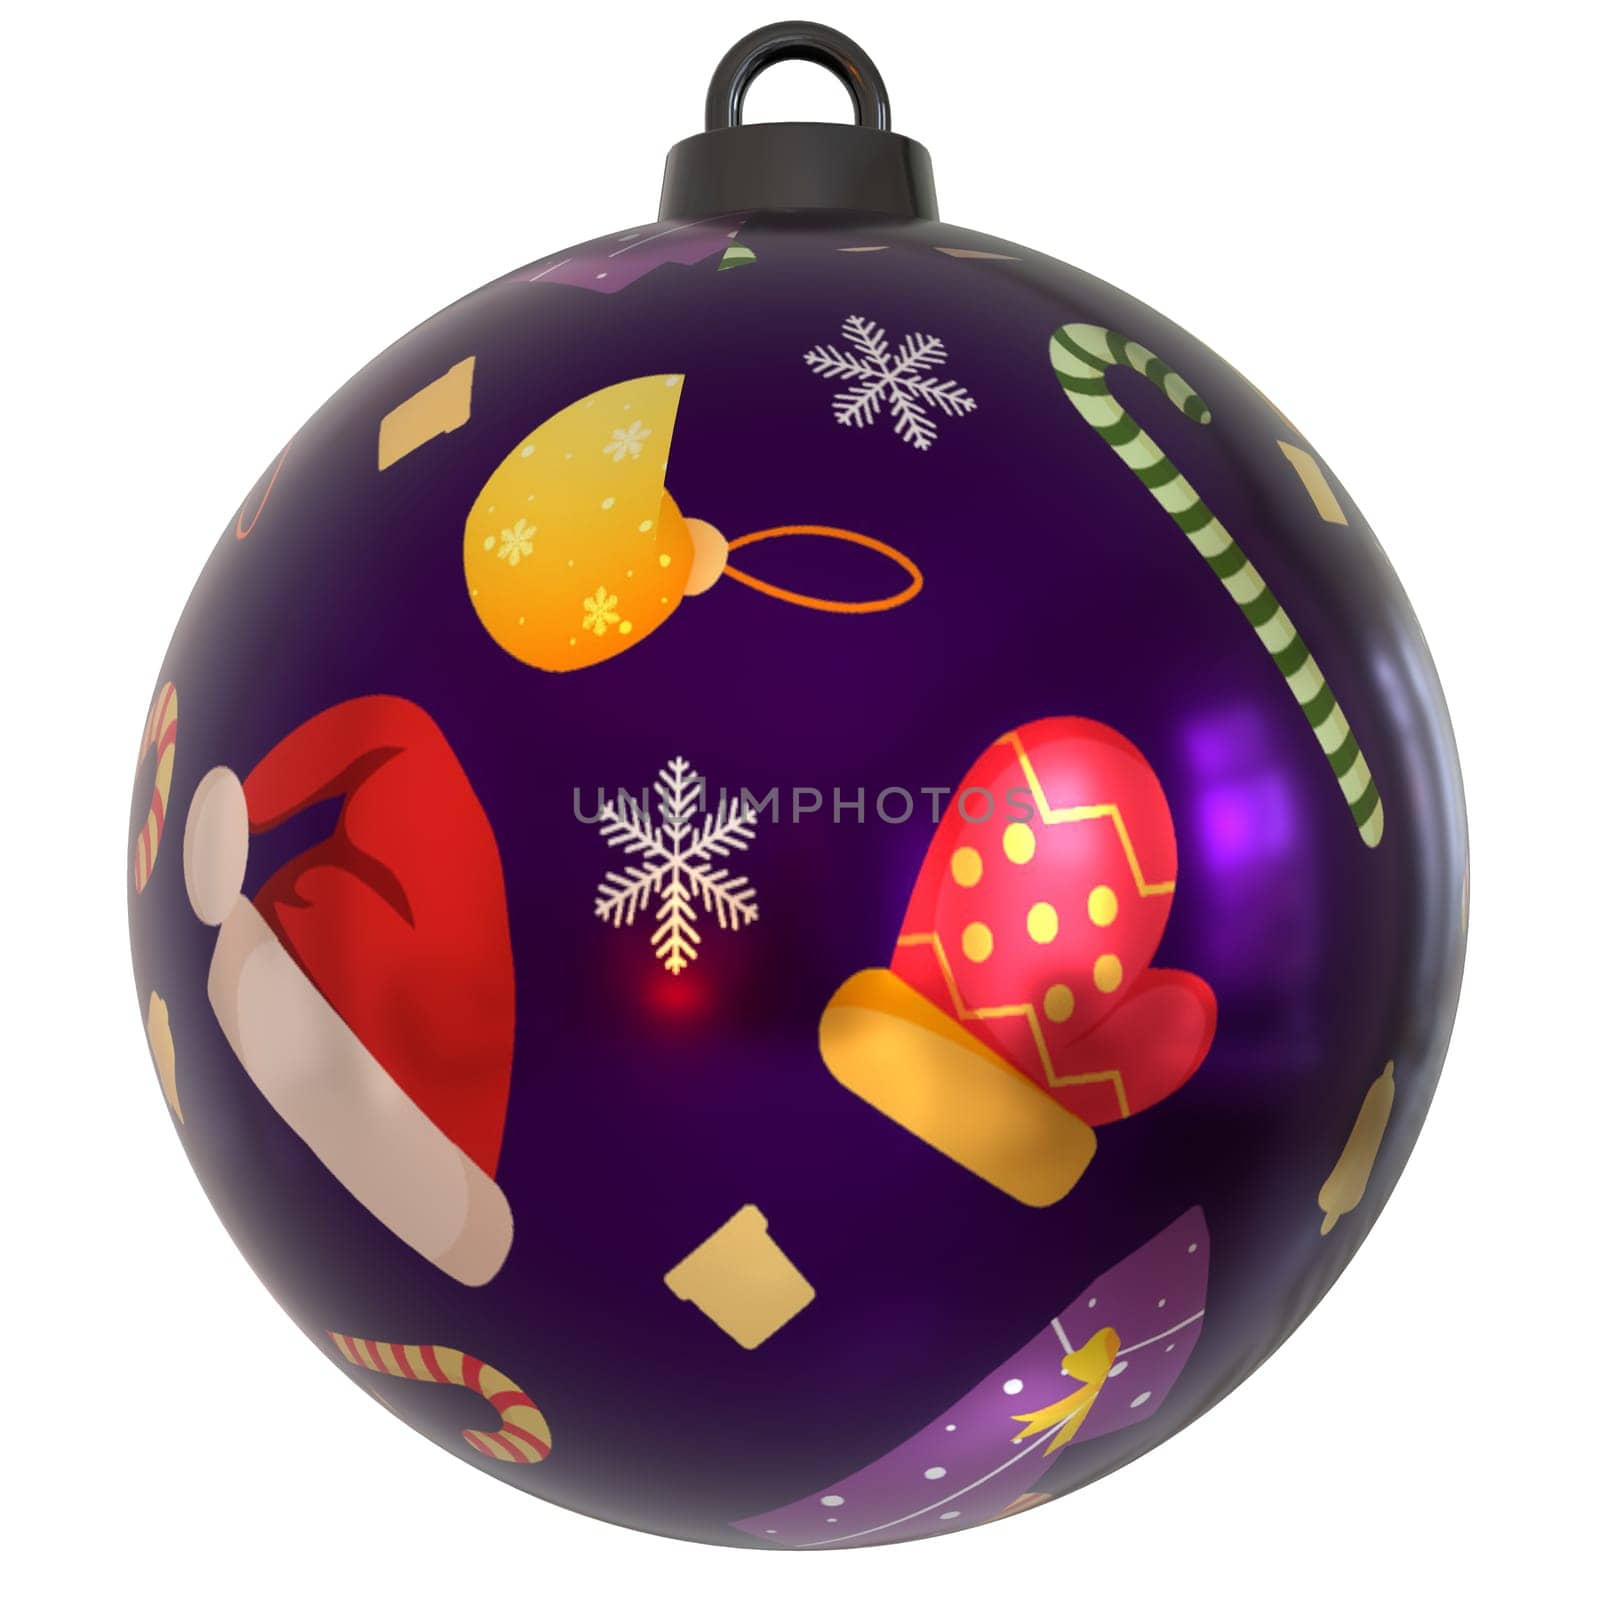 Christmas Ball Ornament isolated on white background. High quality 3d illustration